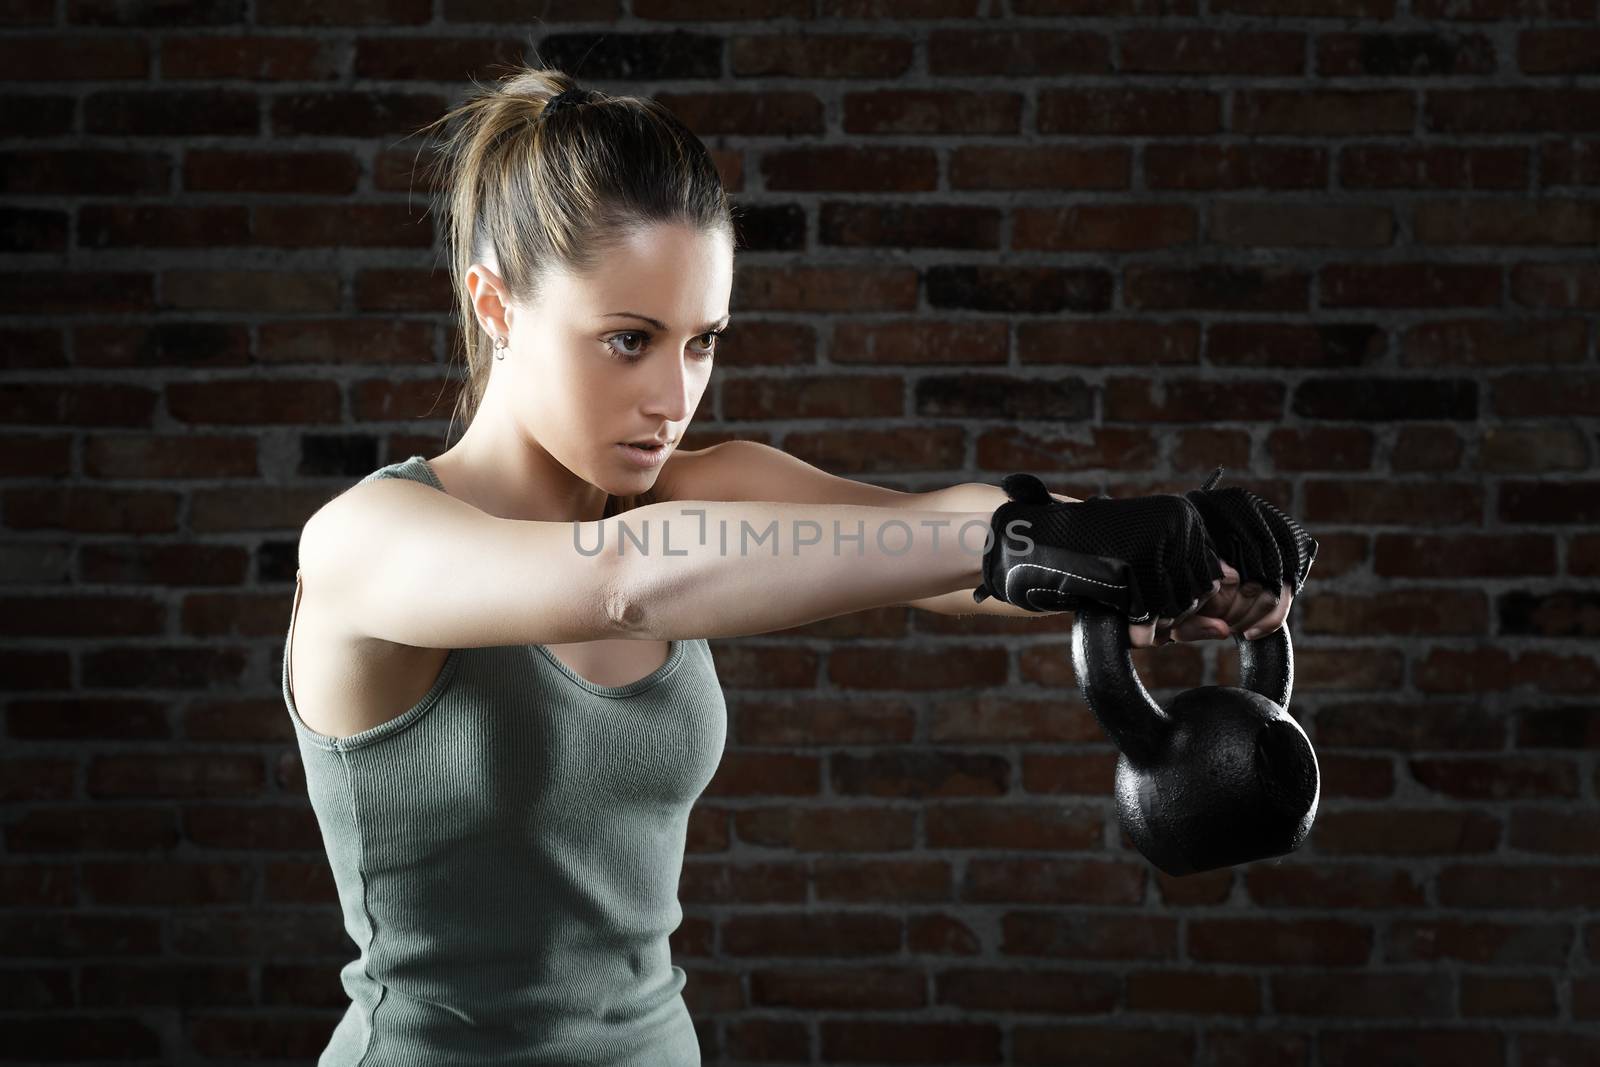 Portrait of Young fit woman lifting kettle bell 